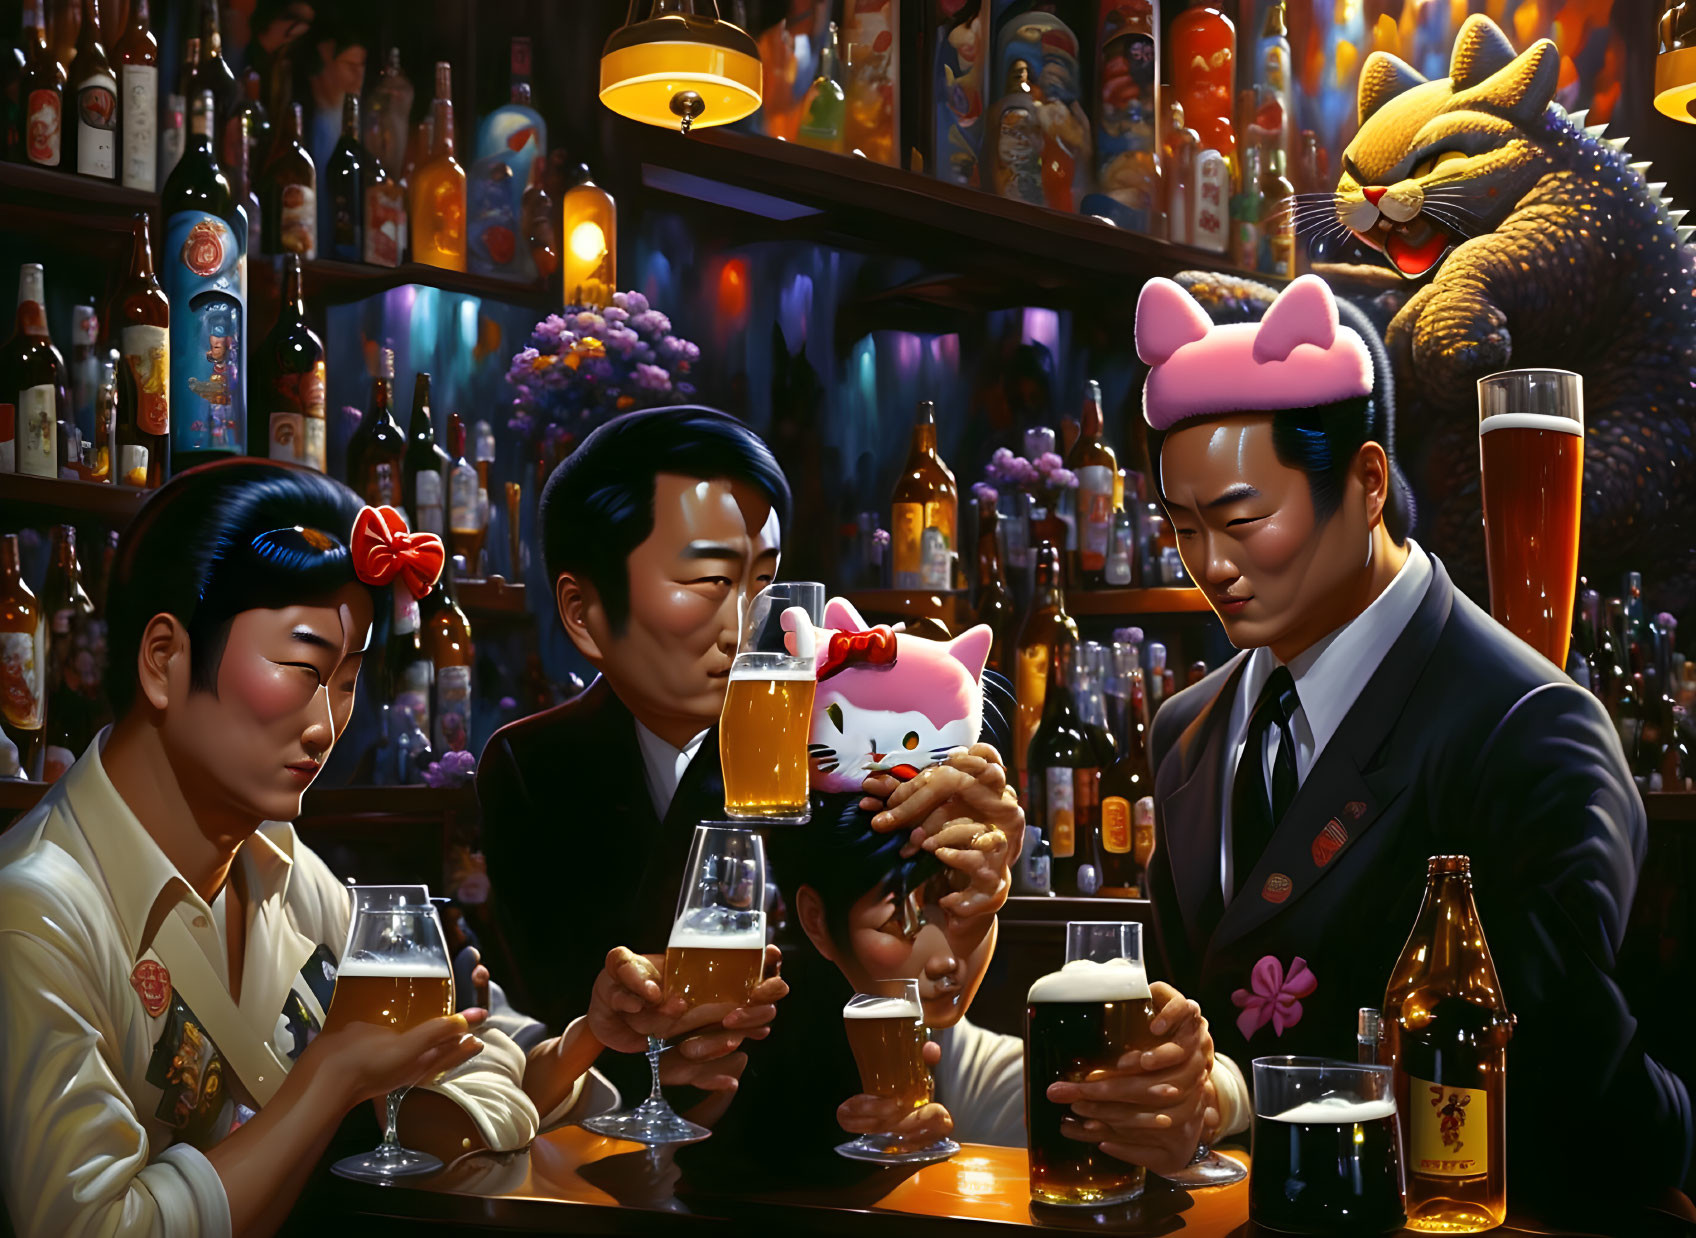 Three people at a vibrant bar with large cat figurine, man touching cat's paw to friend's